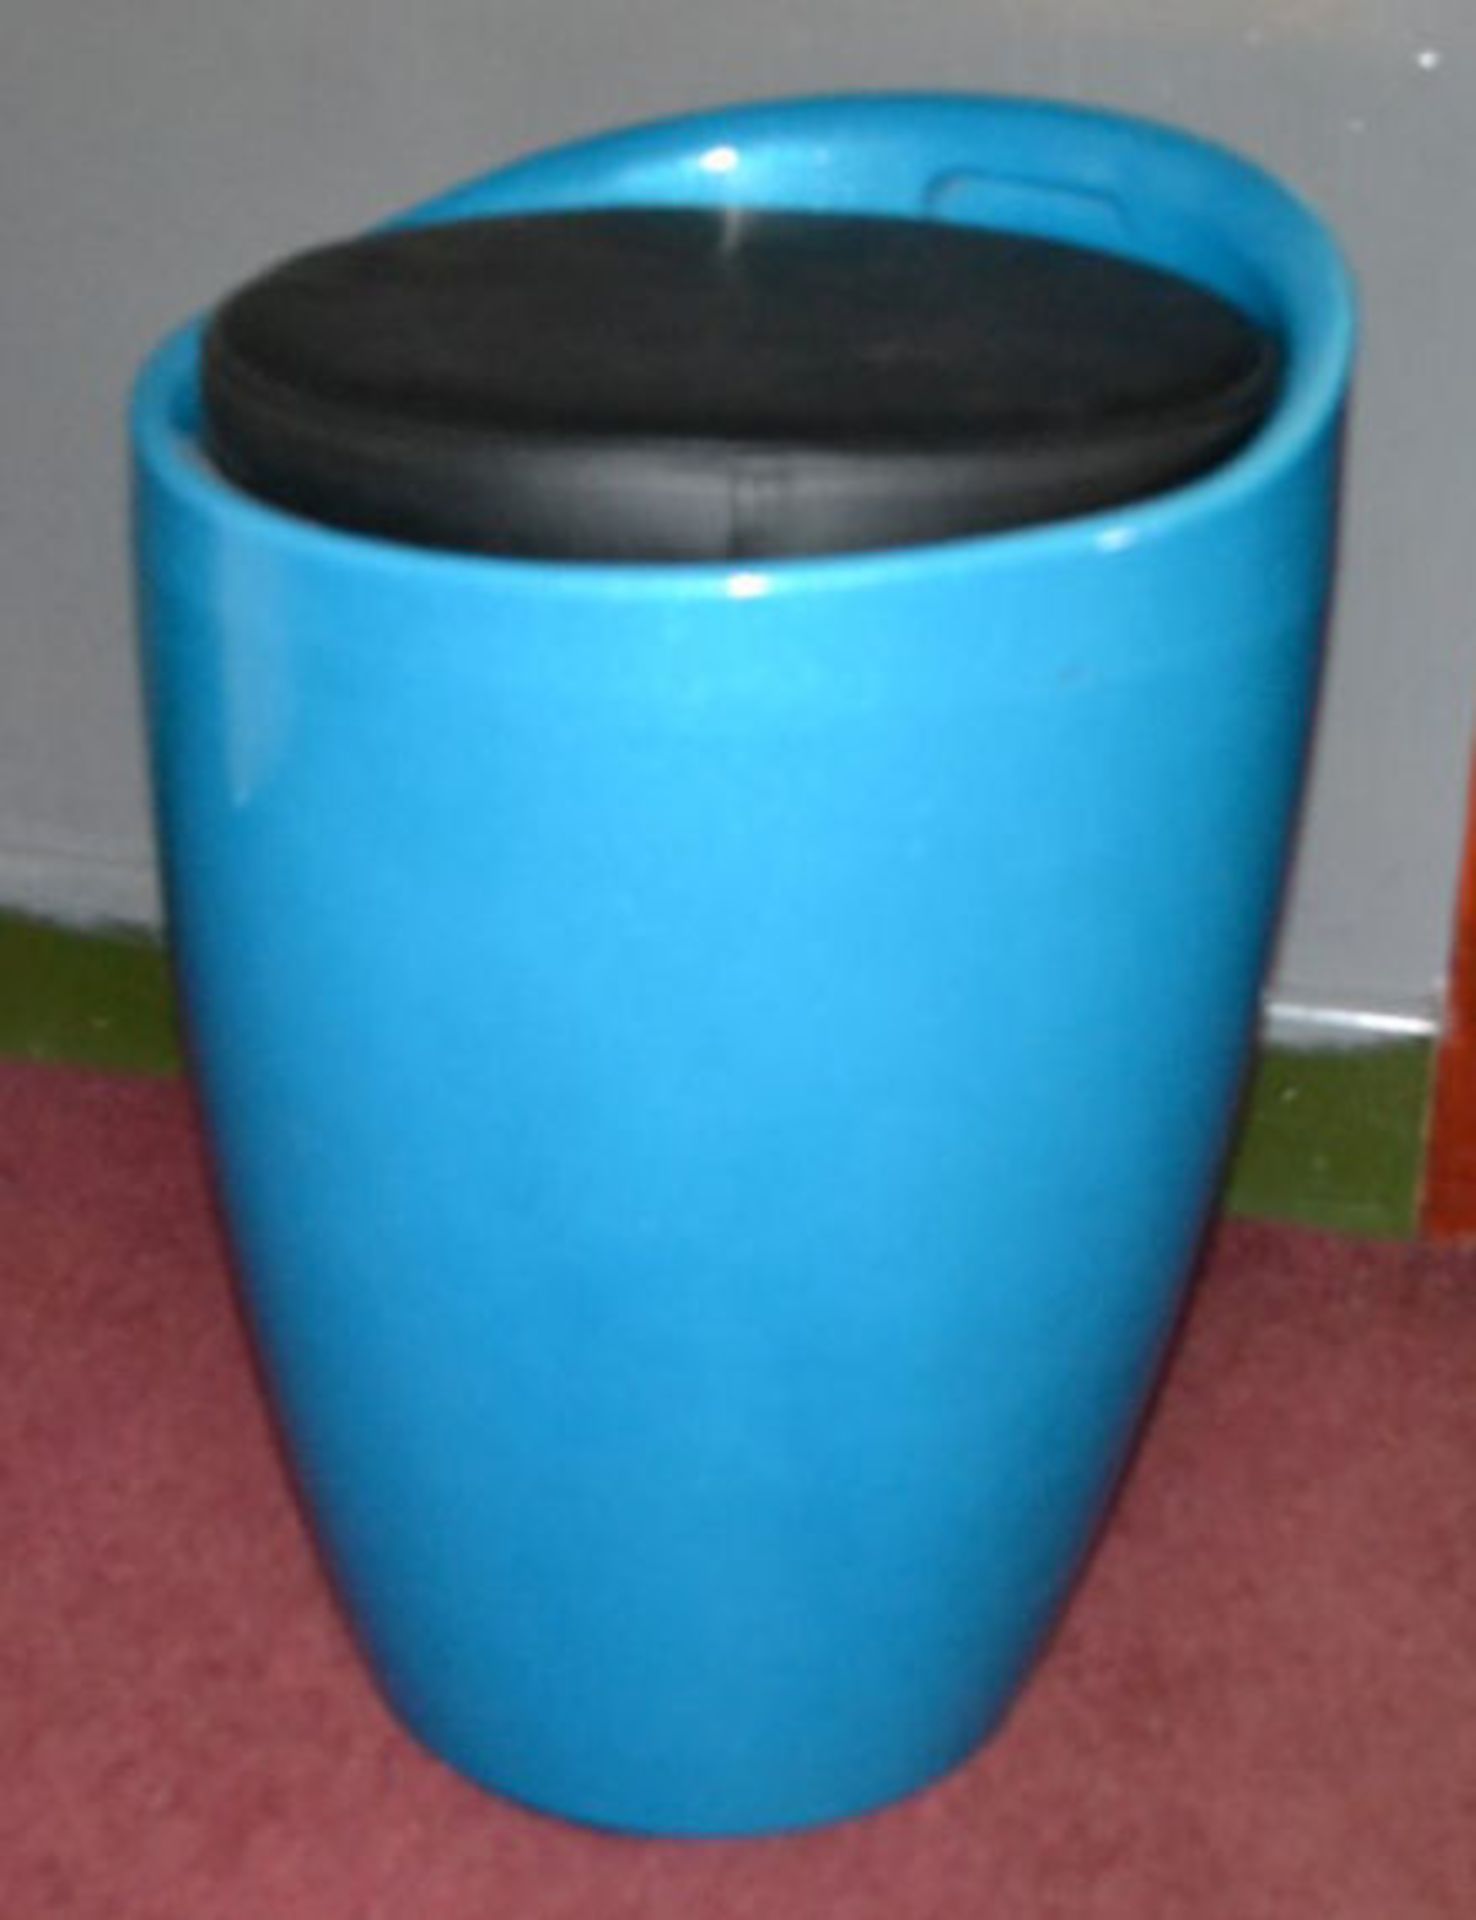 1 x Blue Ottoman Storage Stool with Black Faux Leather Seat - Image 2 of 3